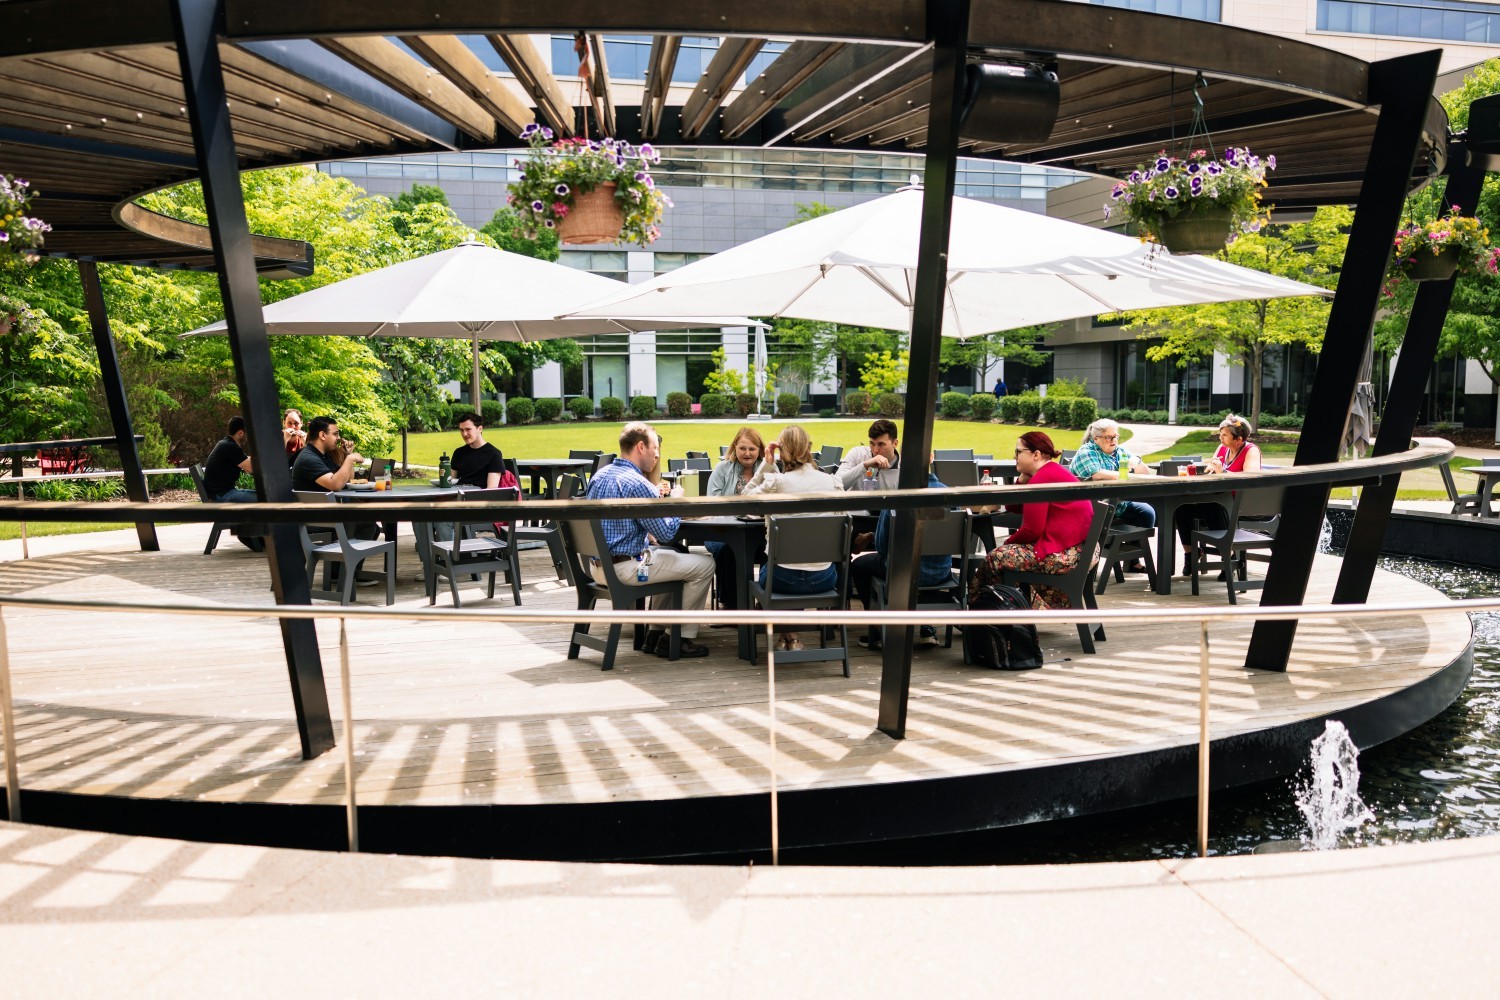 Employees often gather in the courtyard of our campus for lunch, meetings or to relax on the putting green.